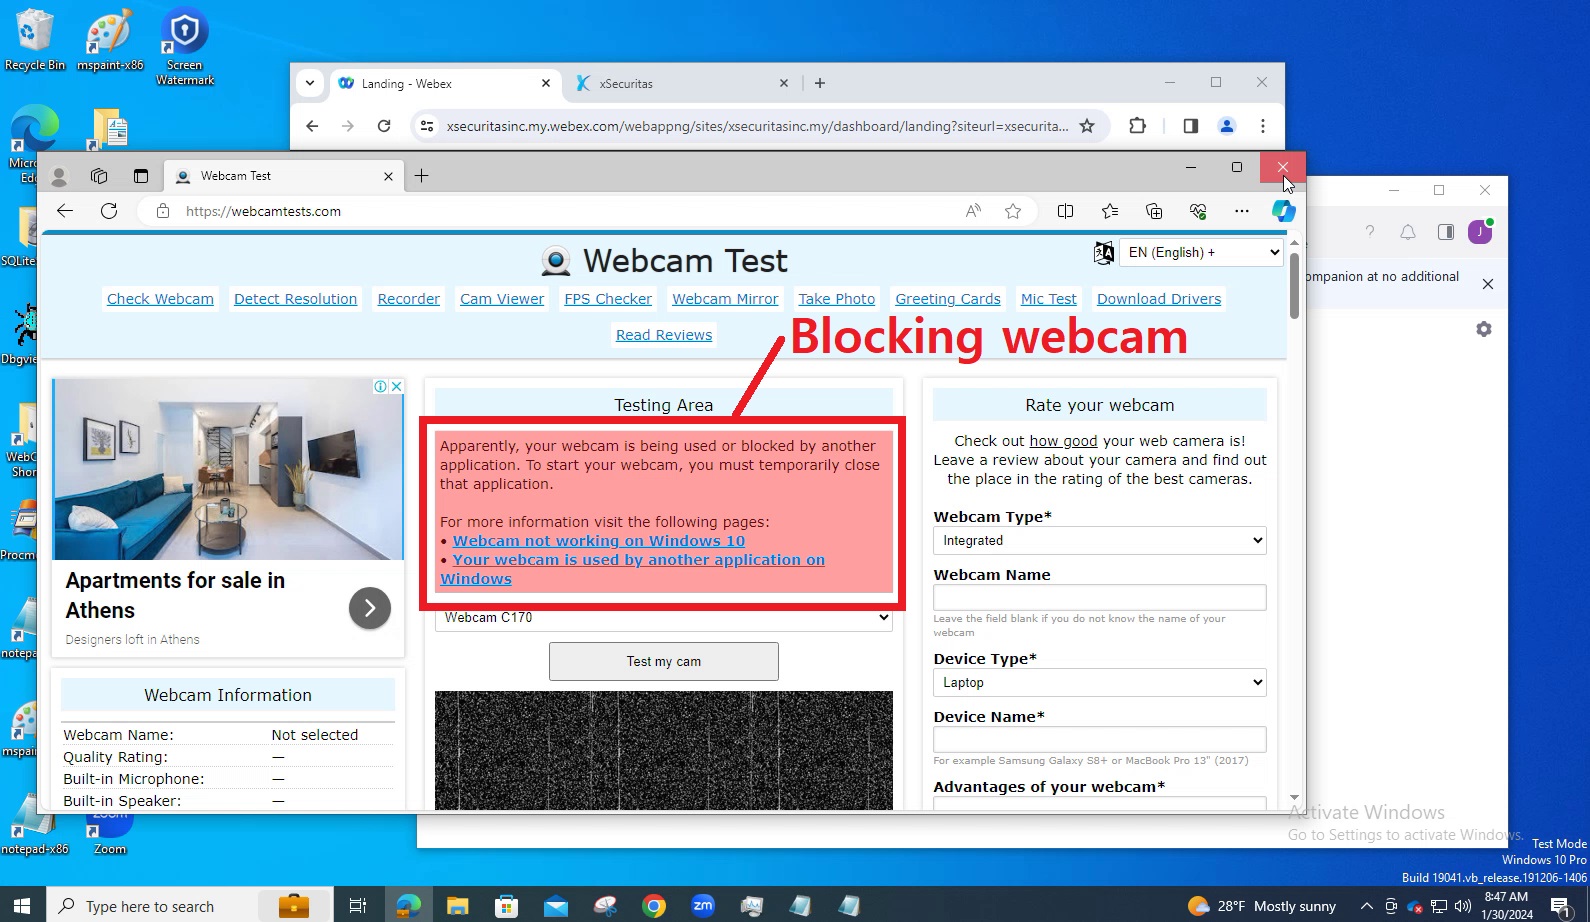 If webcam use is denied at the specified URL